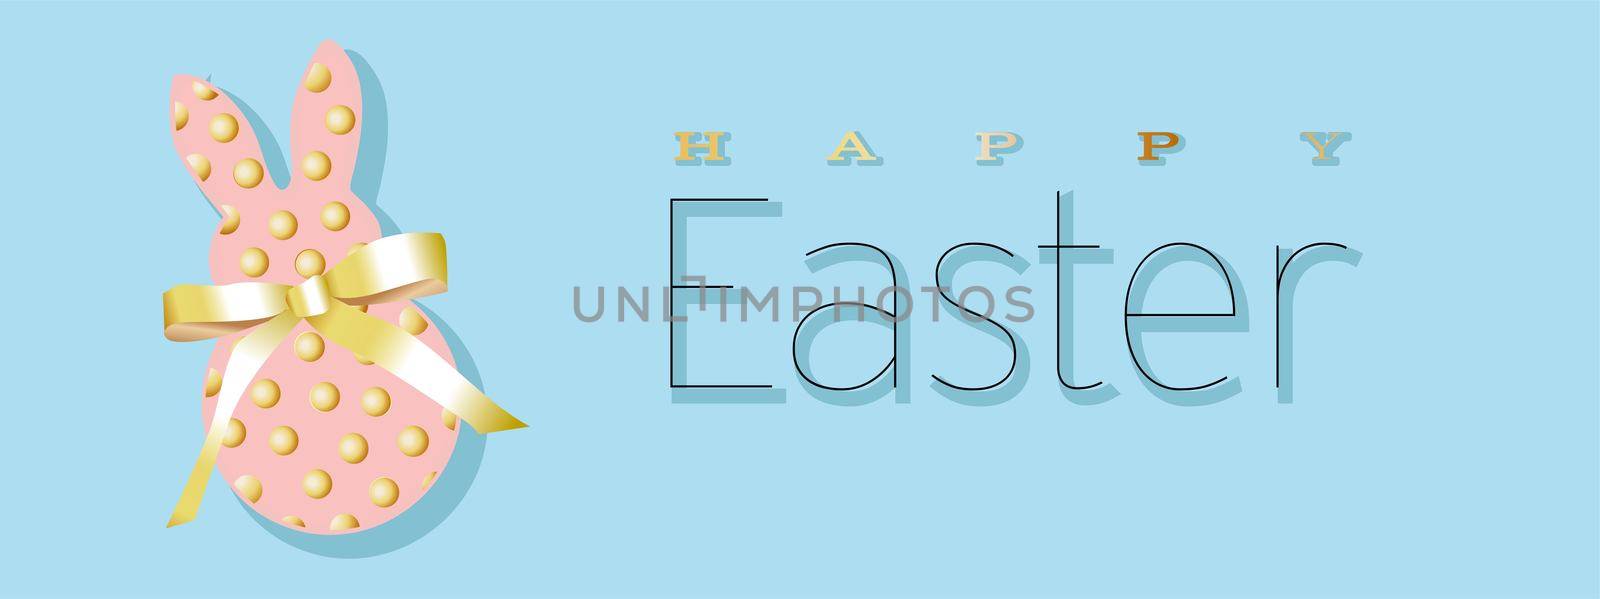 Easter banner. Horizontal poster, postcard, website headers, background with text happy easter. Bunny rabbit with a bow from a gold ribbon on a blue background. Elegant Design with realistic objects..